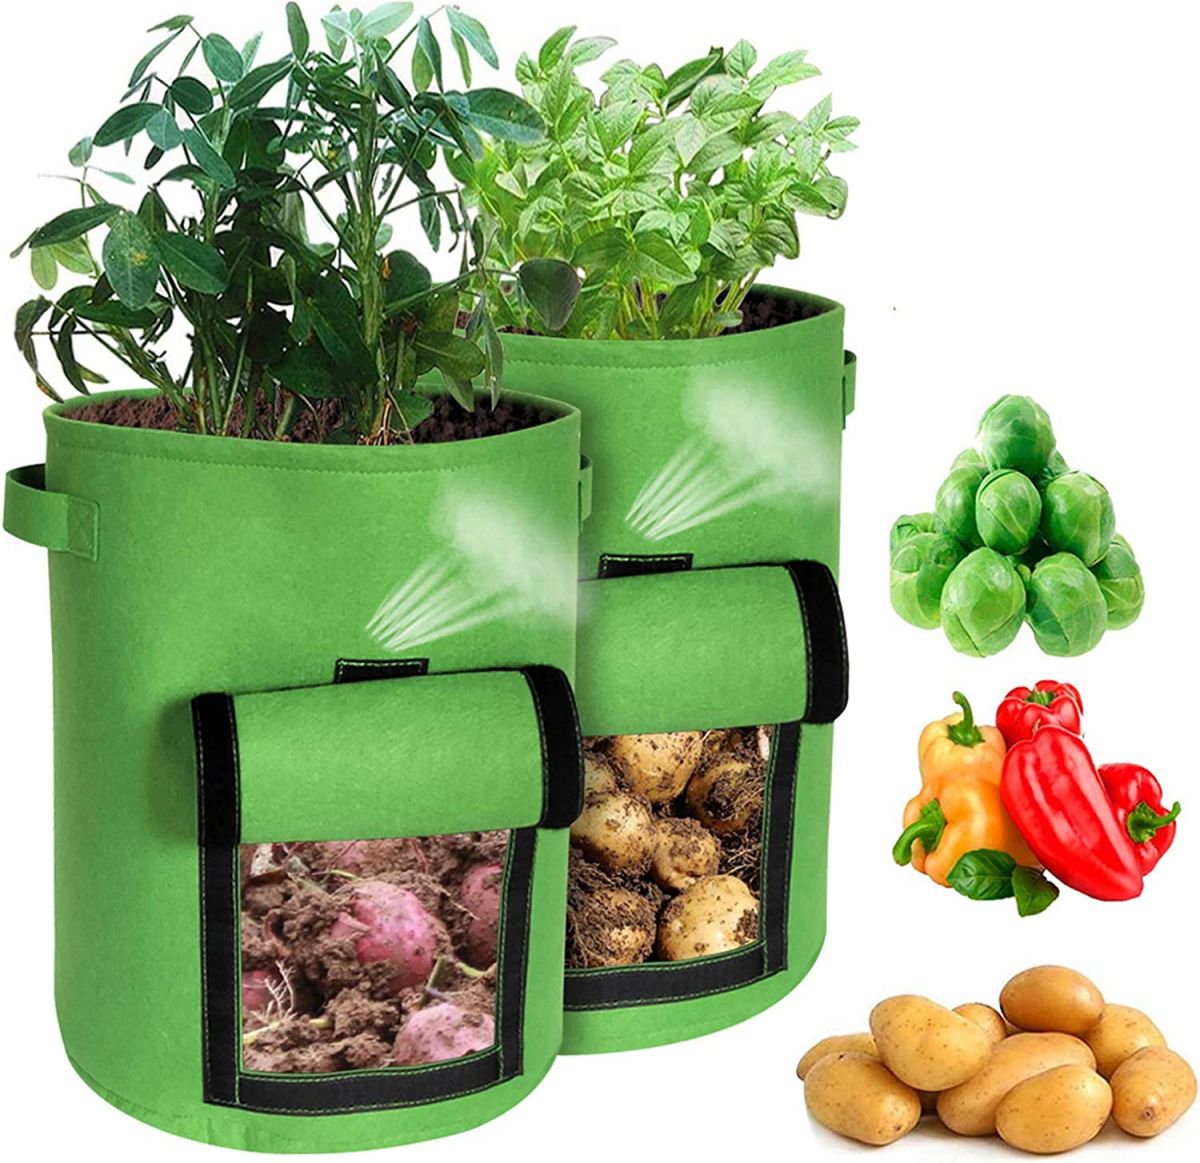 Bag with handles, for growing vegetables (2pcs)